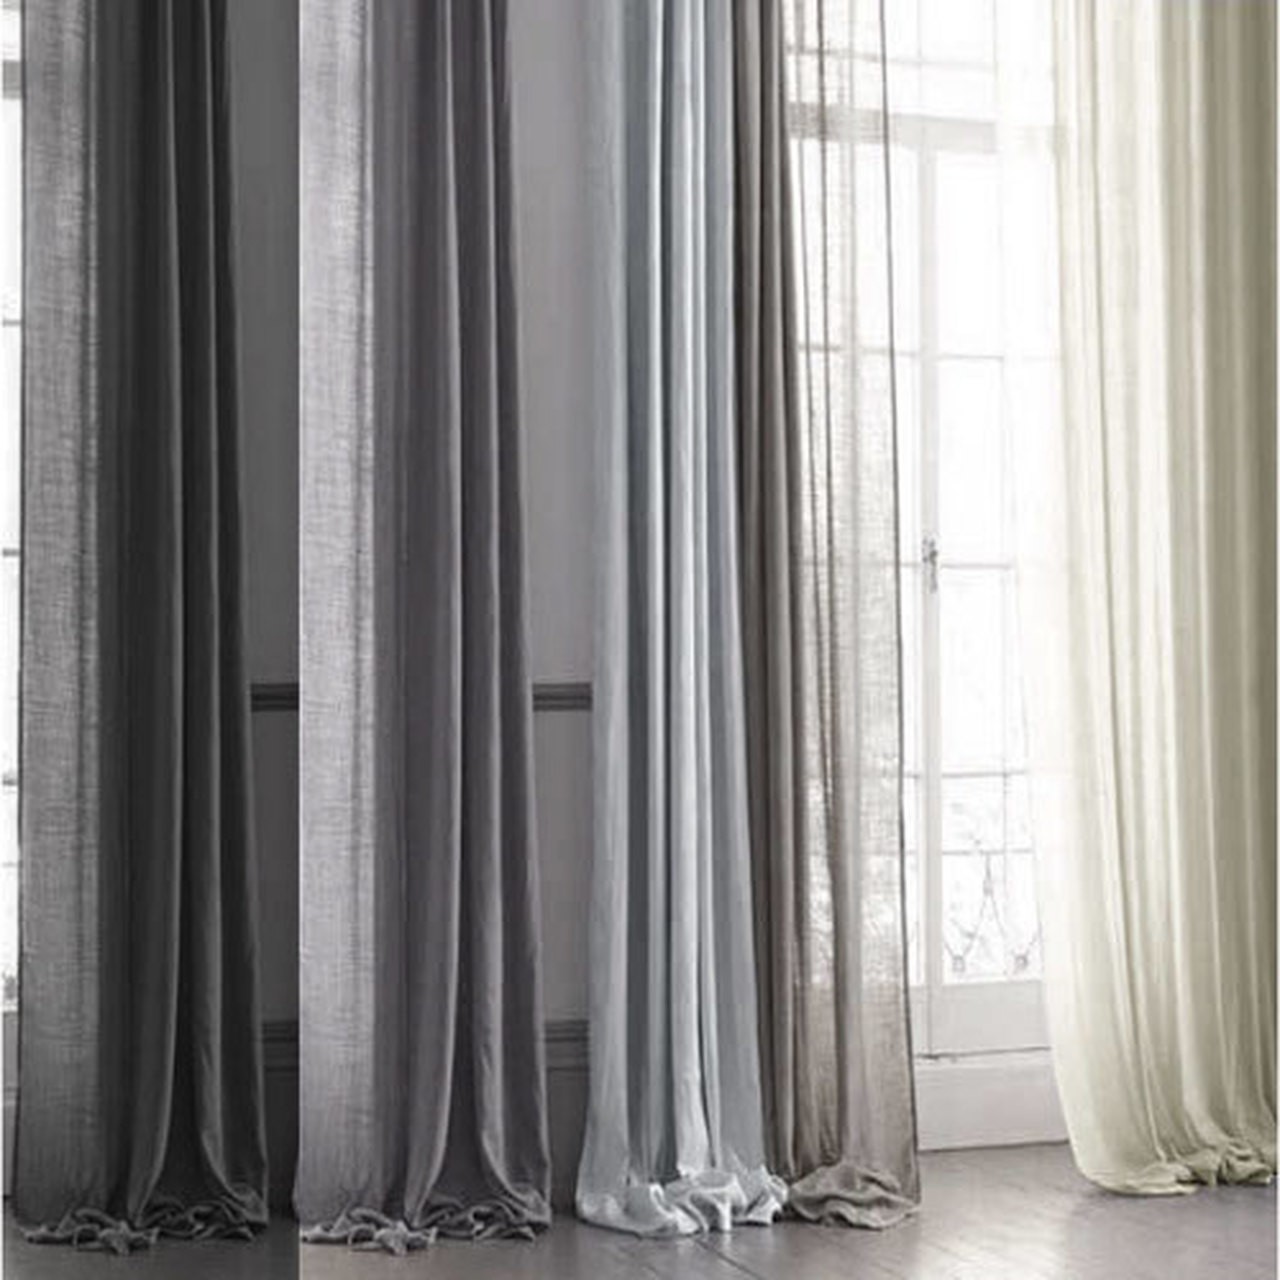 2020 Curtain & Blinds Refer In Johor 